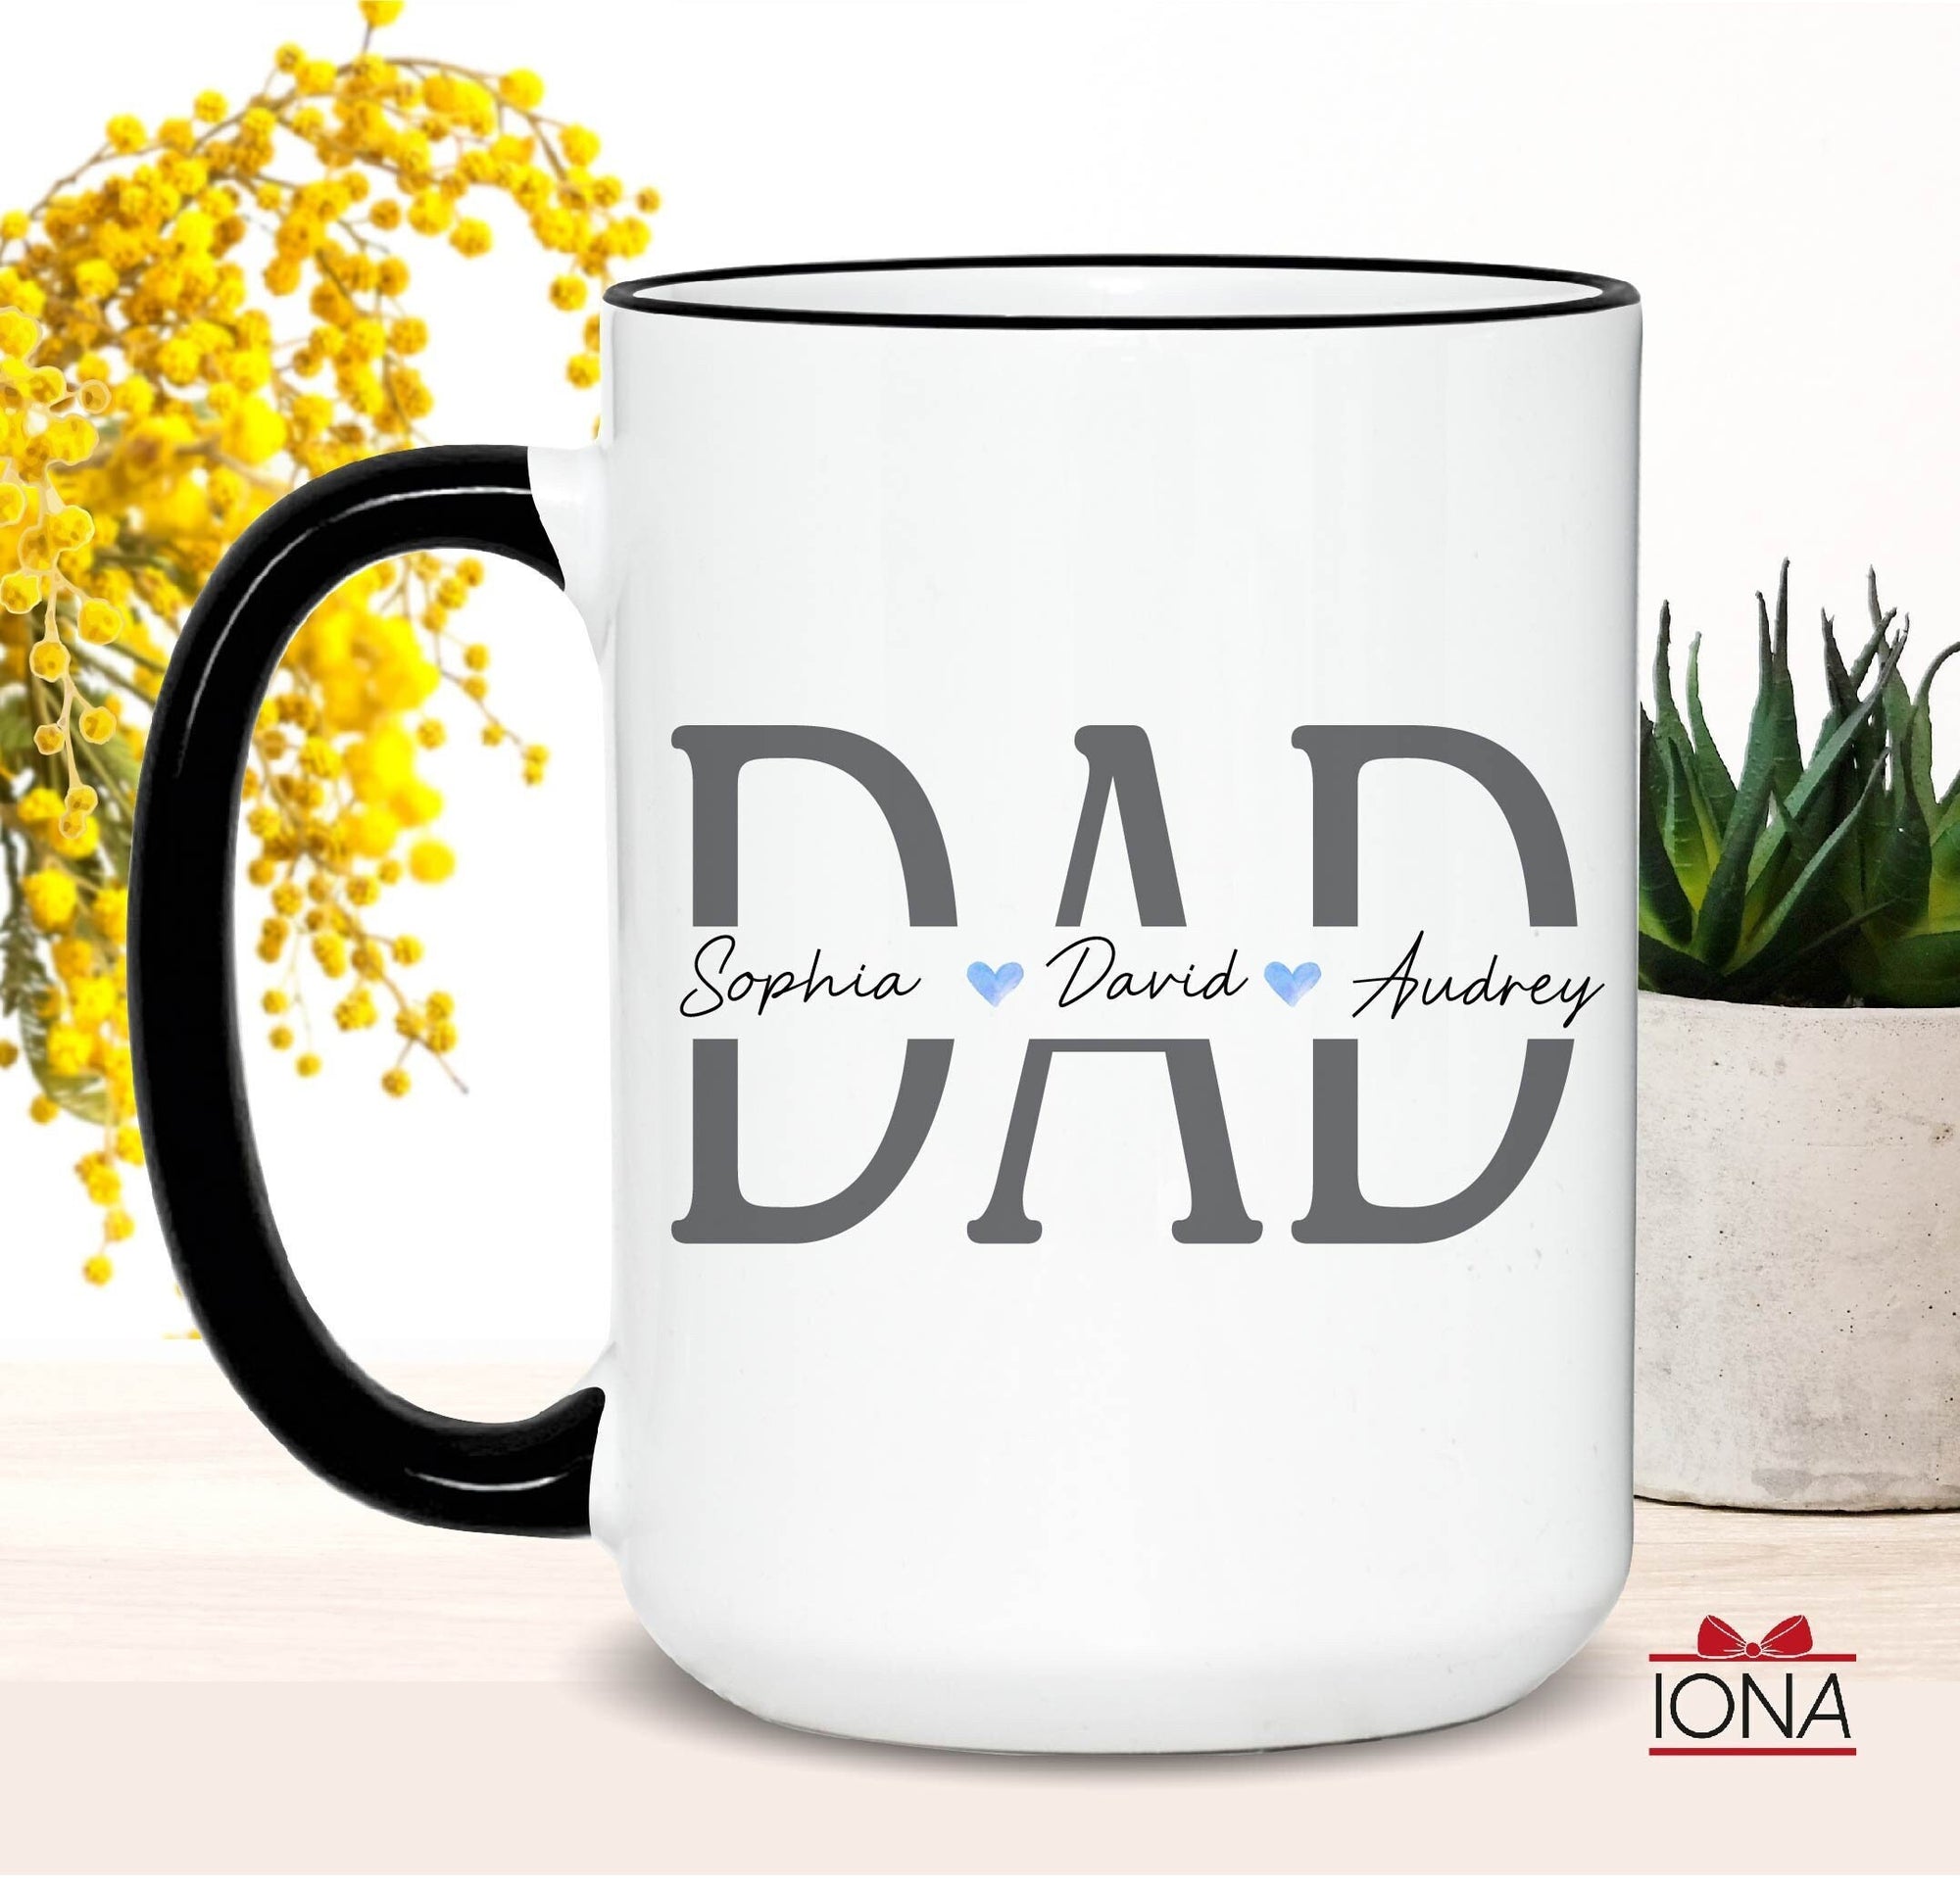 Personalized Dad Coffee Mug With Kids Names for Dad, Custom Father's Day Gift, Dad Birthday Gift from Daughter, Son, Coffee Mug for dad